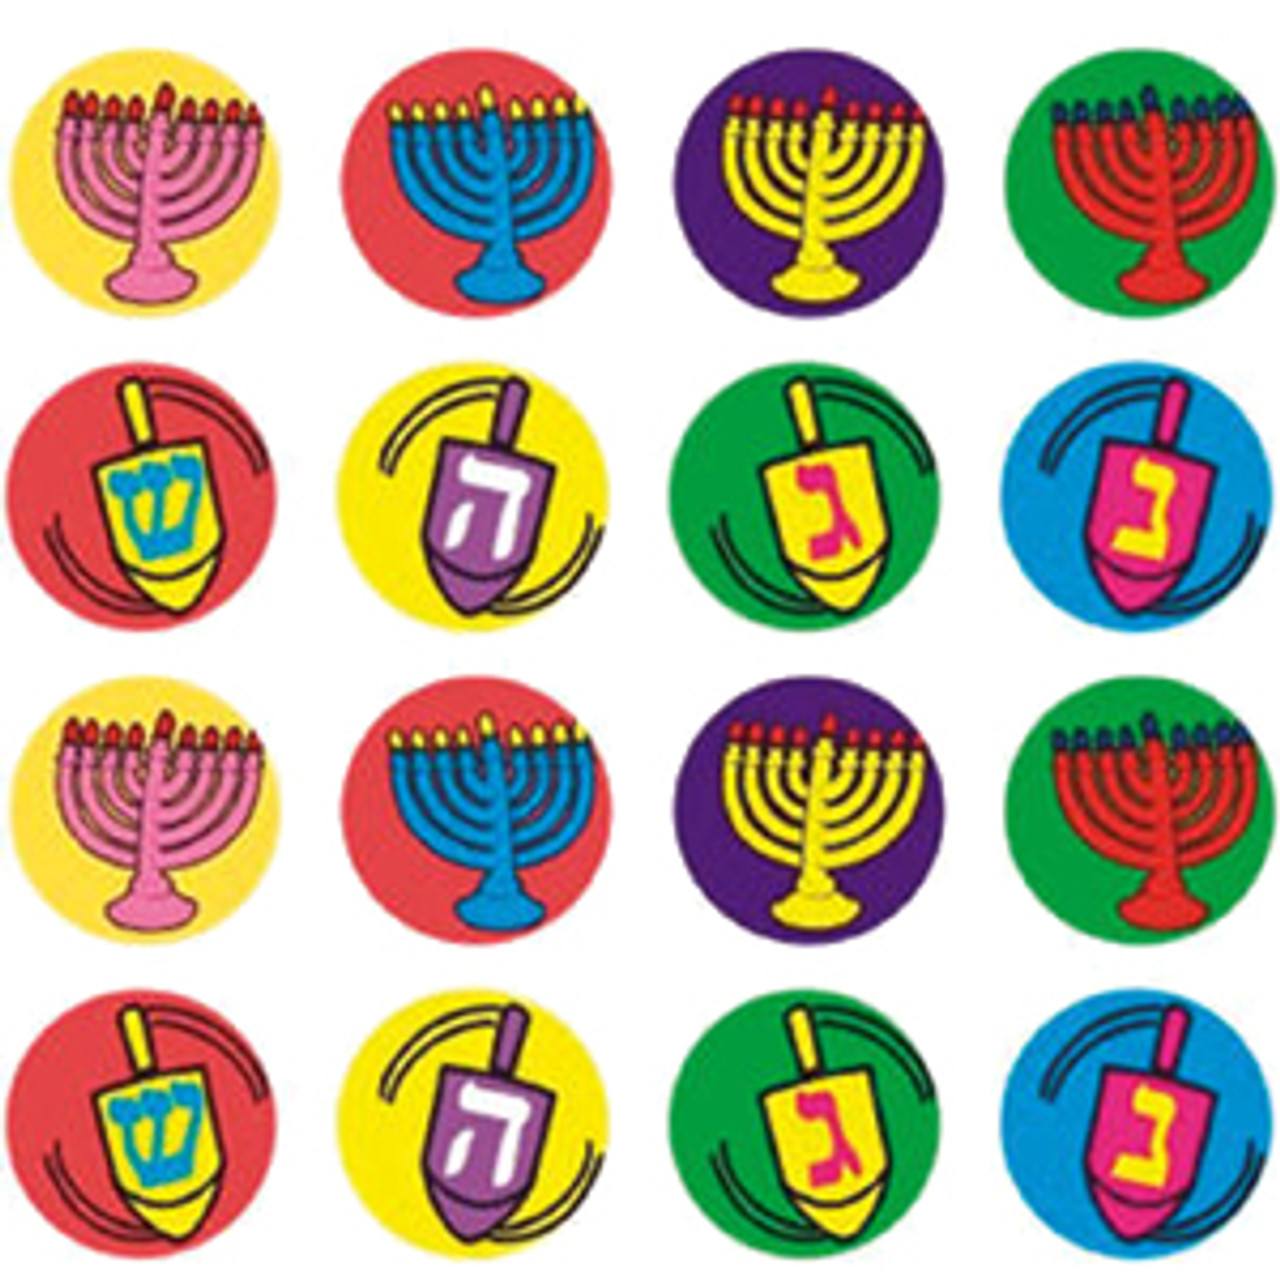 Multi 20 Pack Fabric Markers  at the Jewish School Supply Company